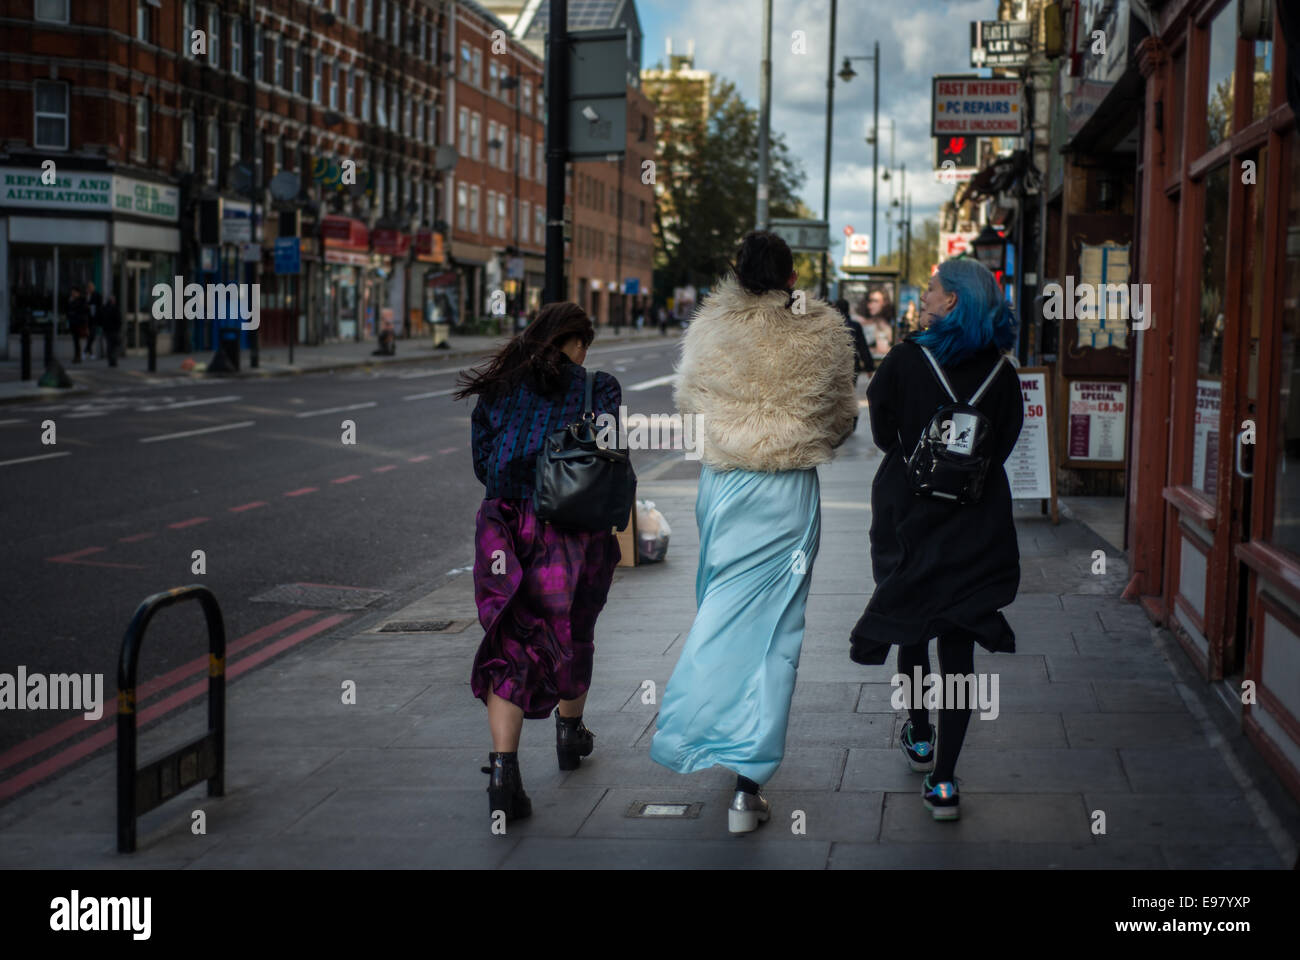 London, UK - 21 October 2014: Three young women dressed in eccentric outfit walk on Stoke Newington Road, Dalston in London. Stock Photo